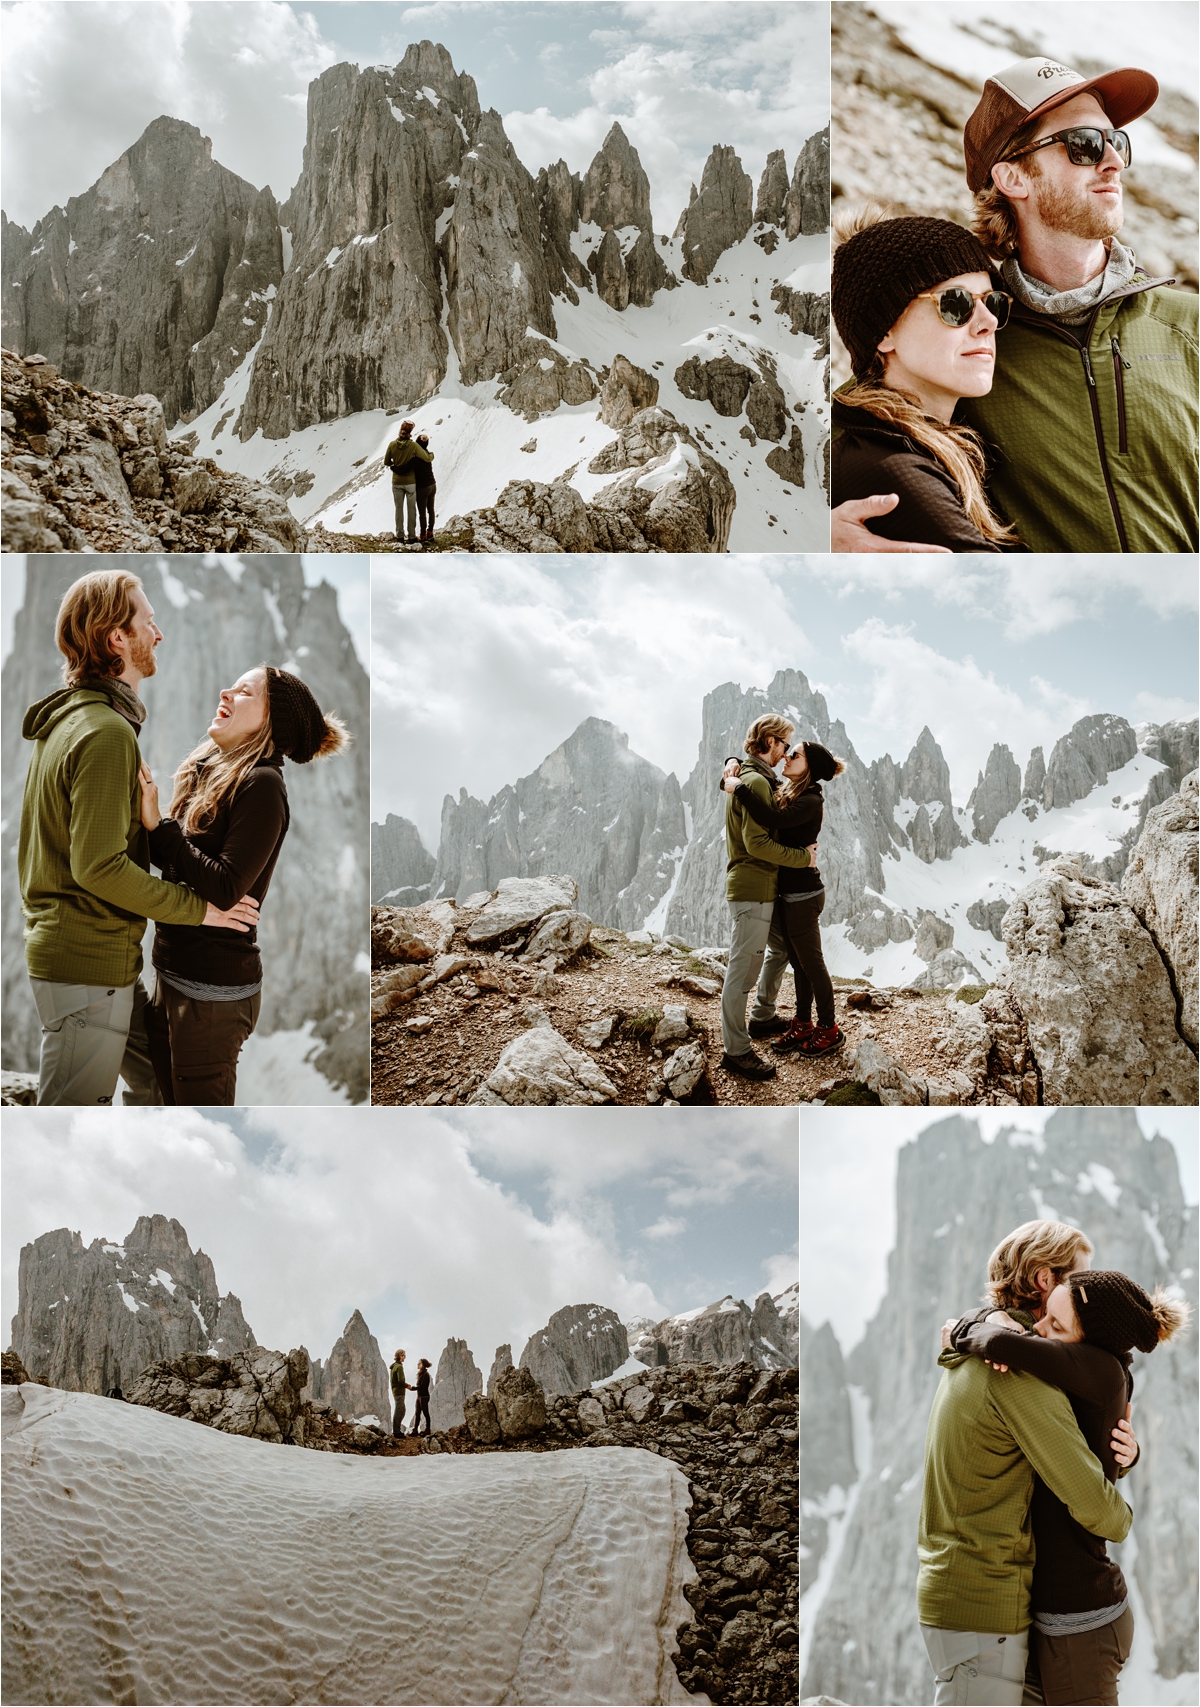 Adam & Michelle enjoying the views at the top of the Cima Mulaz in the Dolomites, the day before their elopement. Photography by Wild Connections Photography